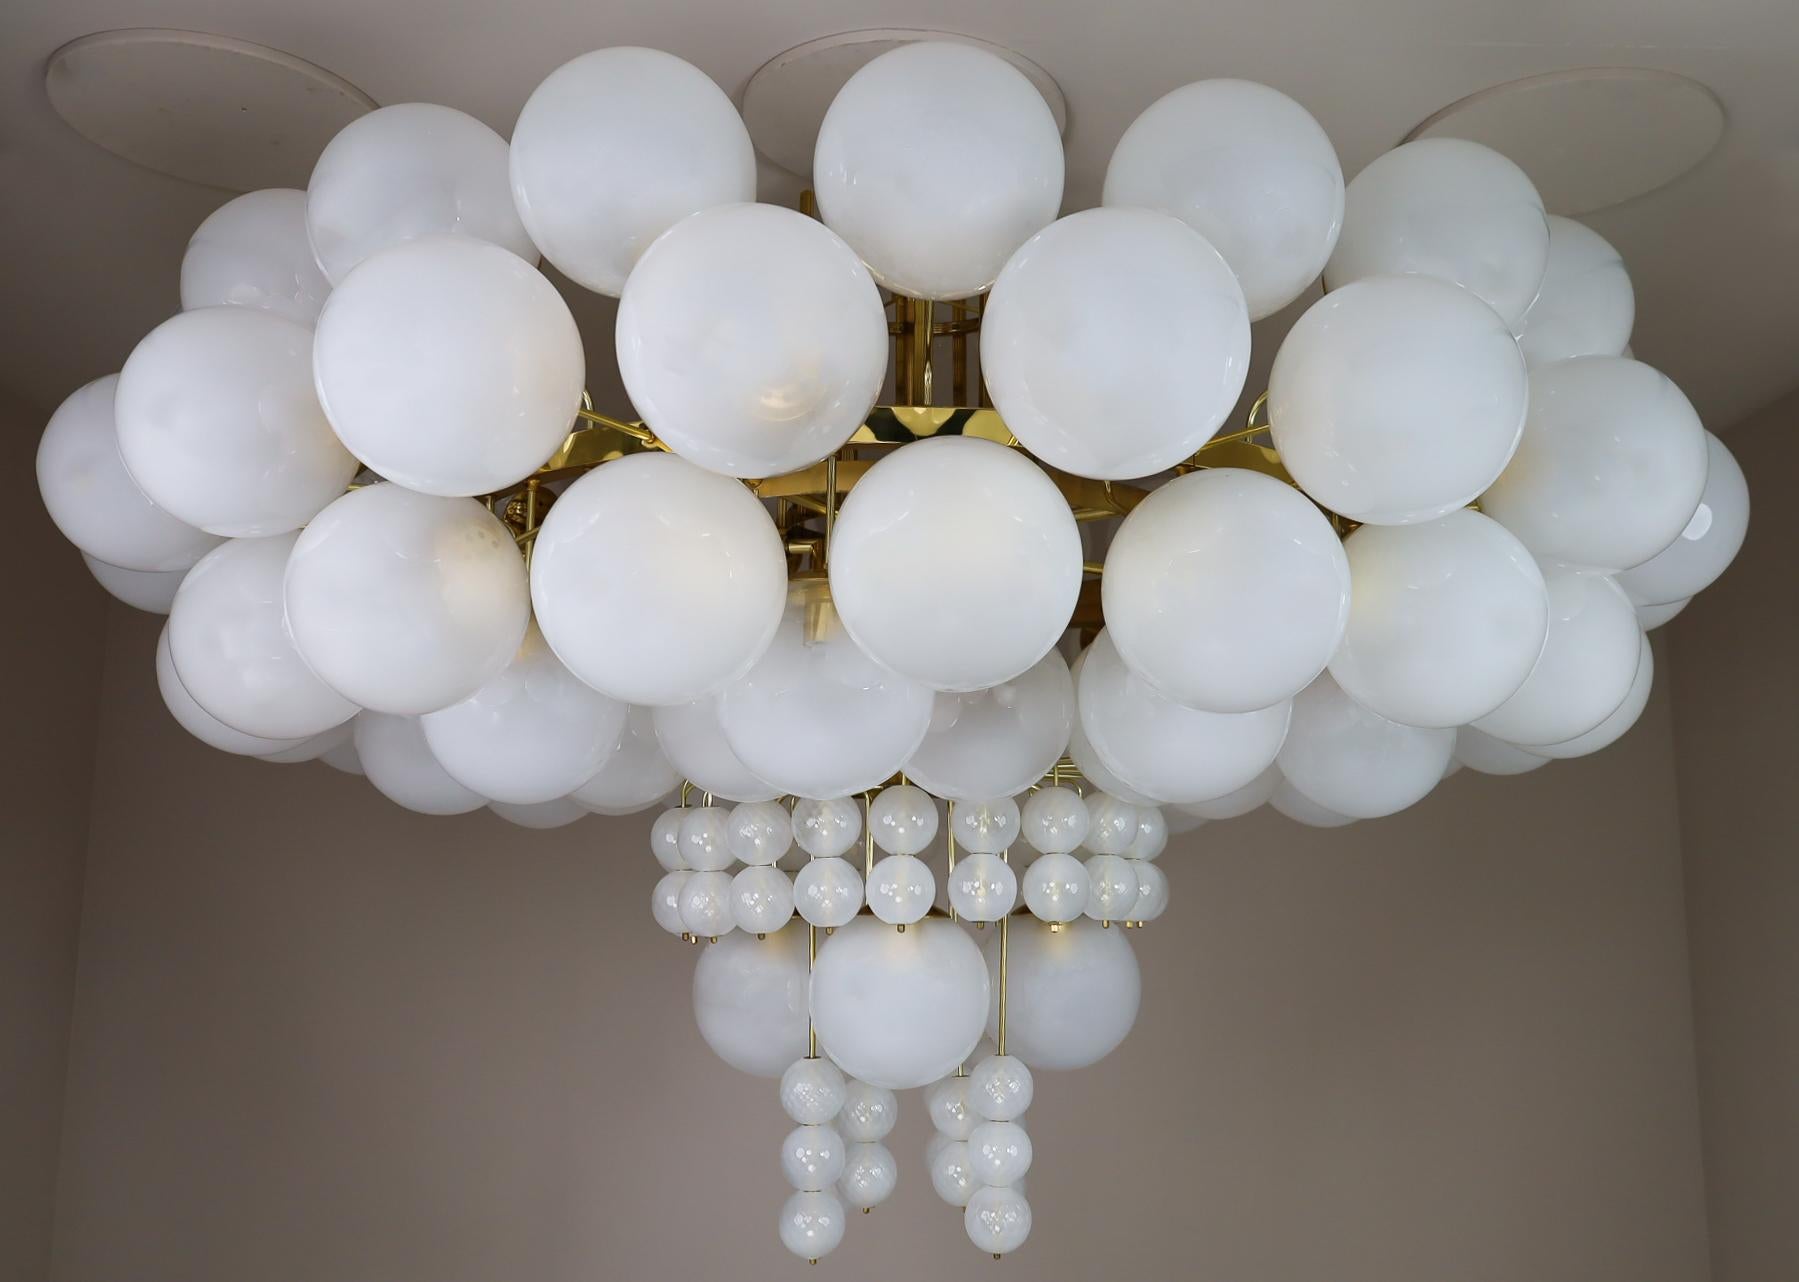 XXL hotel chandelier with brass fixture and hand-blowed frosted glass globes by Preciosa, Czechia.

Extremely large diameter 7.2 Ft / 86 Inch hotel chandelier with brass fixture produced and designed in Czechia by the famous Preciosa Factory.